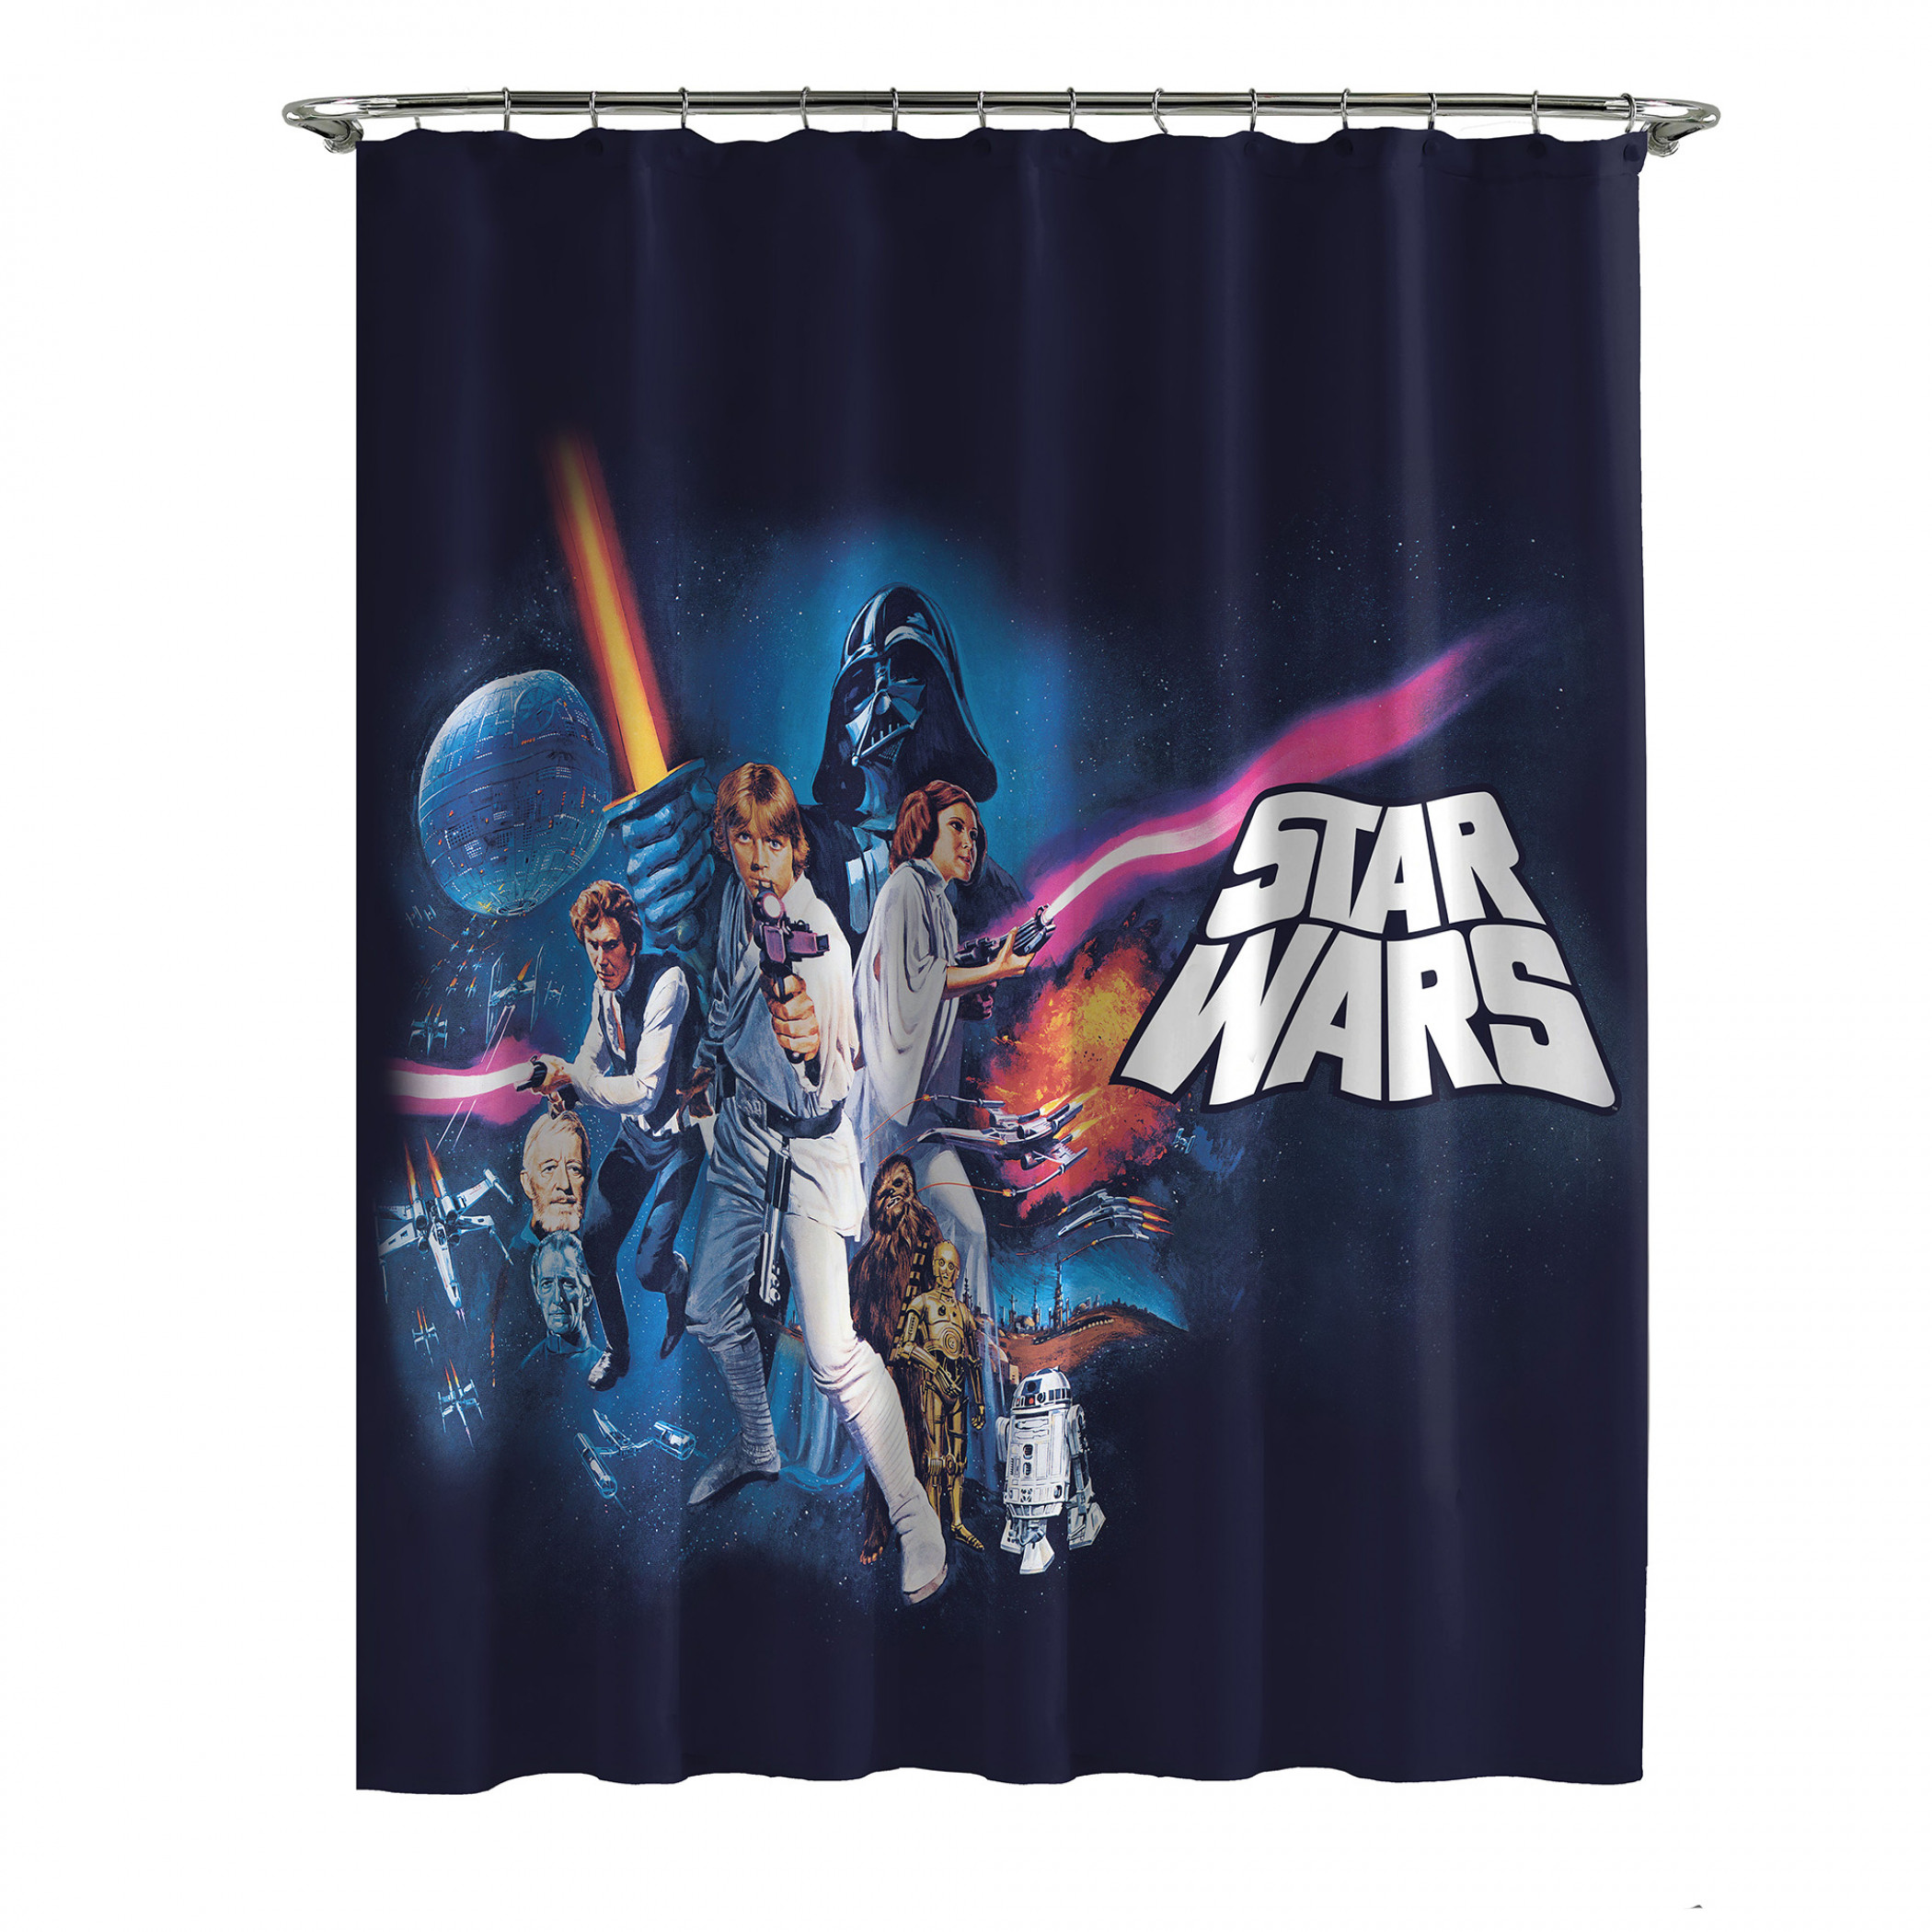 Star Wars The Empire Strikes Back Vintage Poster Shower Curtain